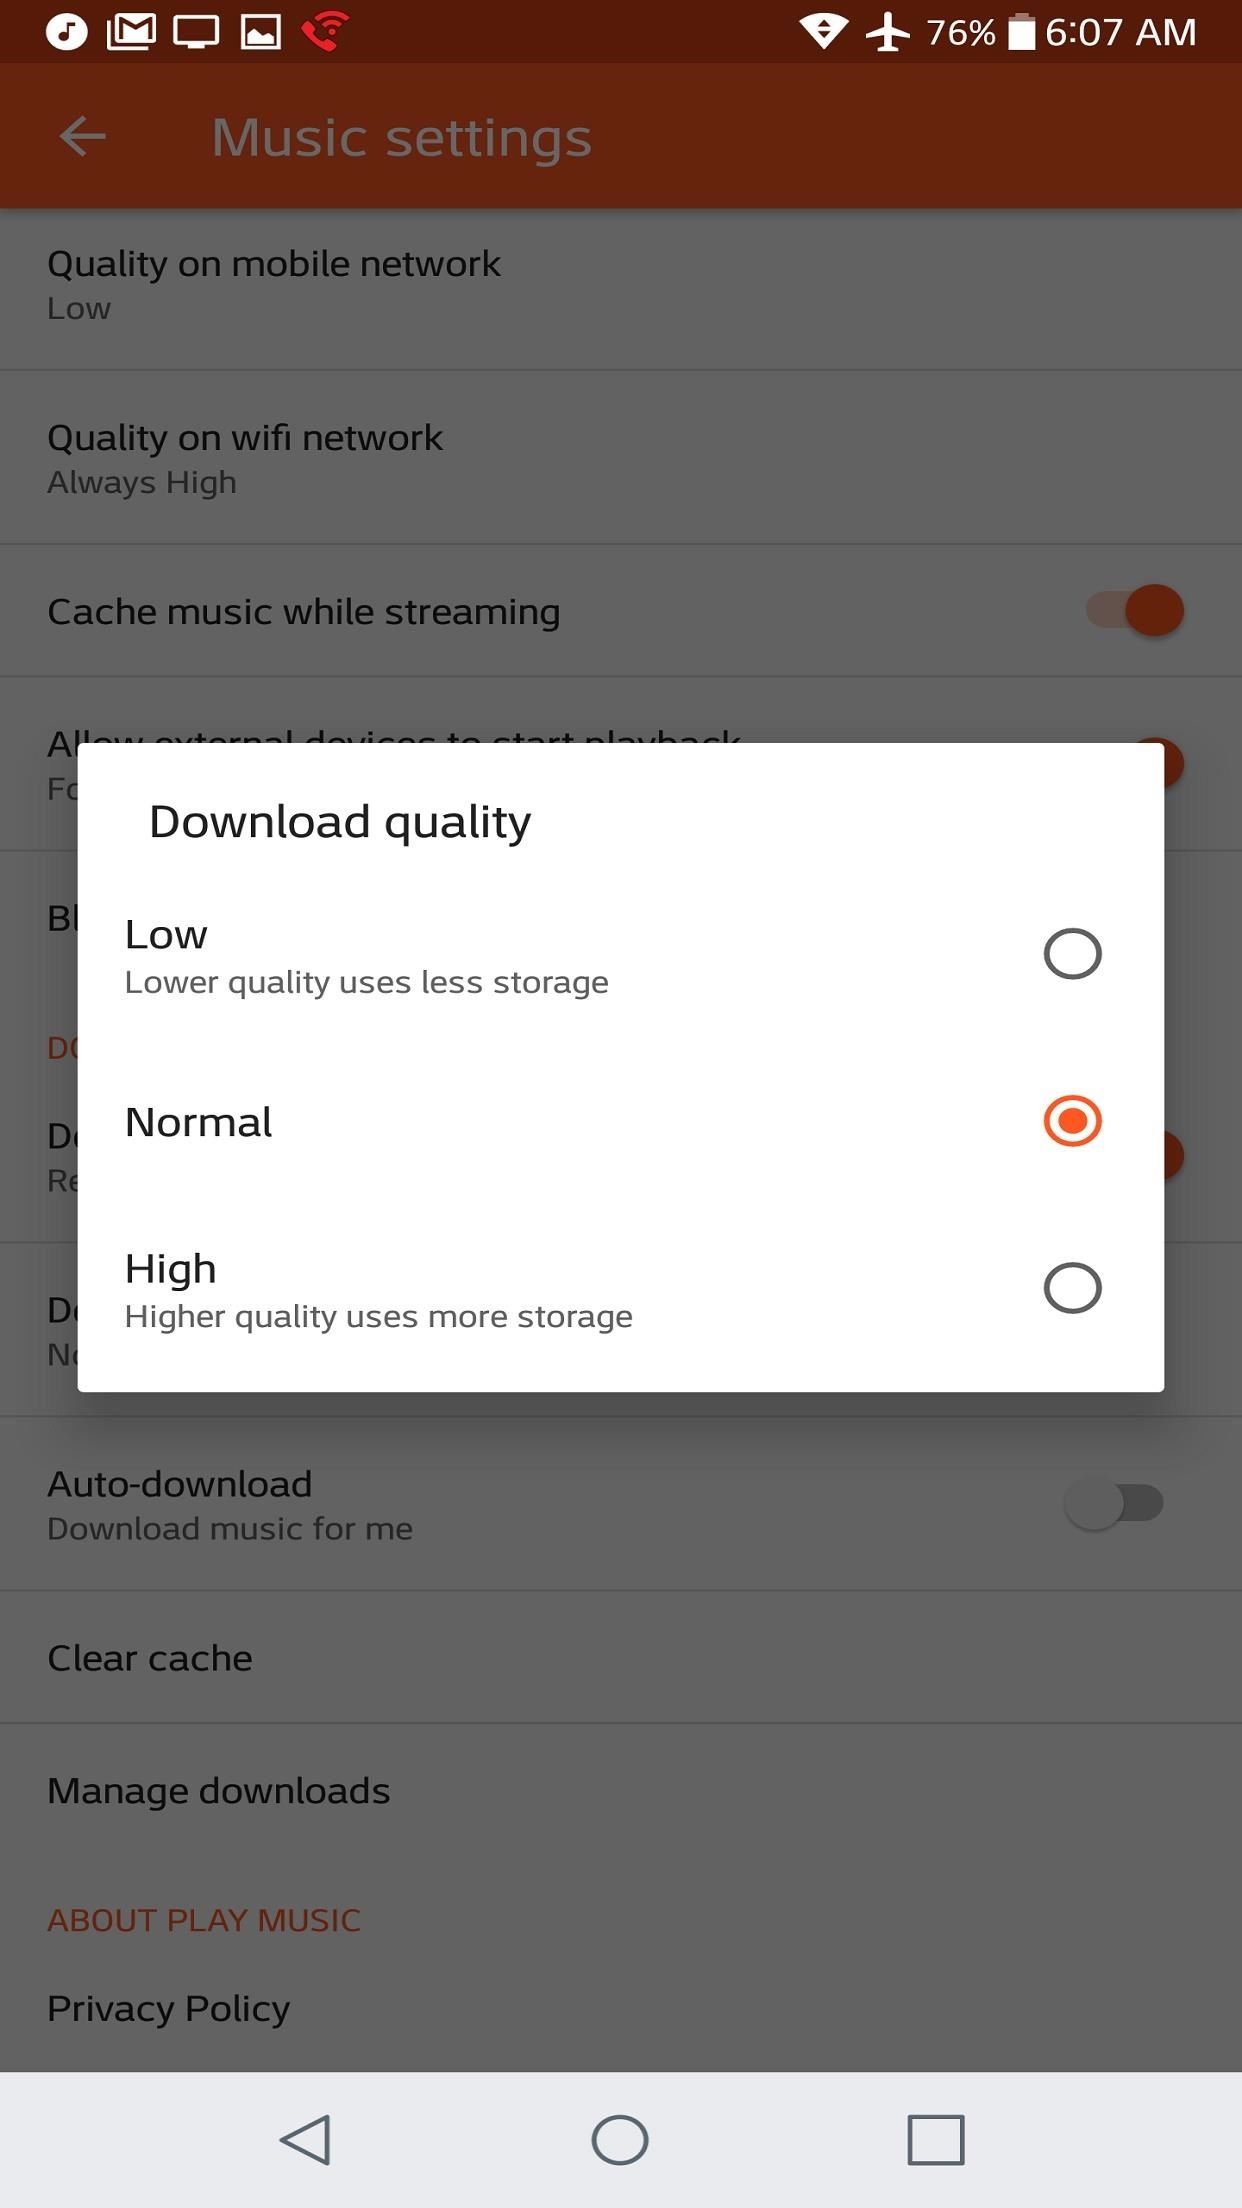 Google Play Music 101: How to Adjust Music Quality to Save Data While Listening